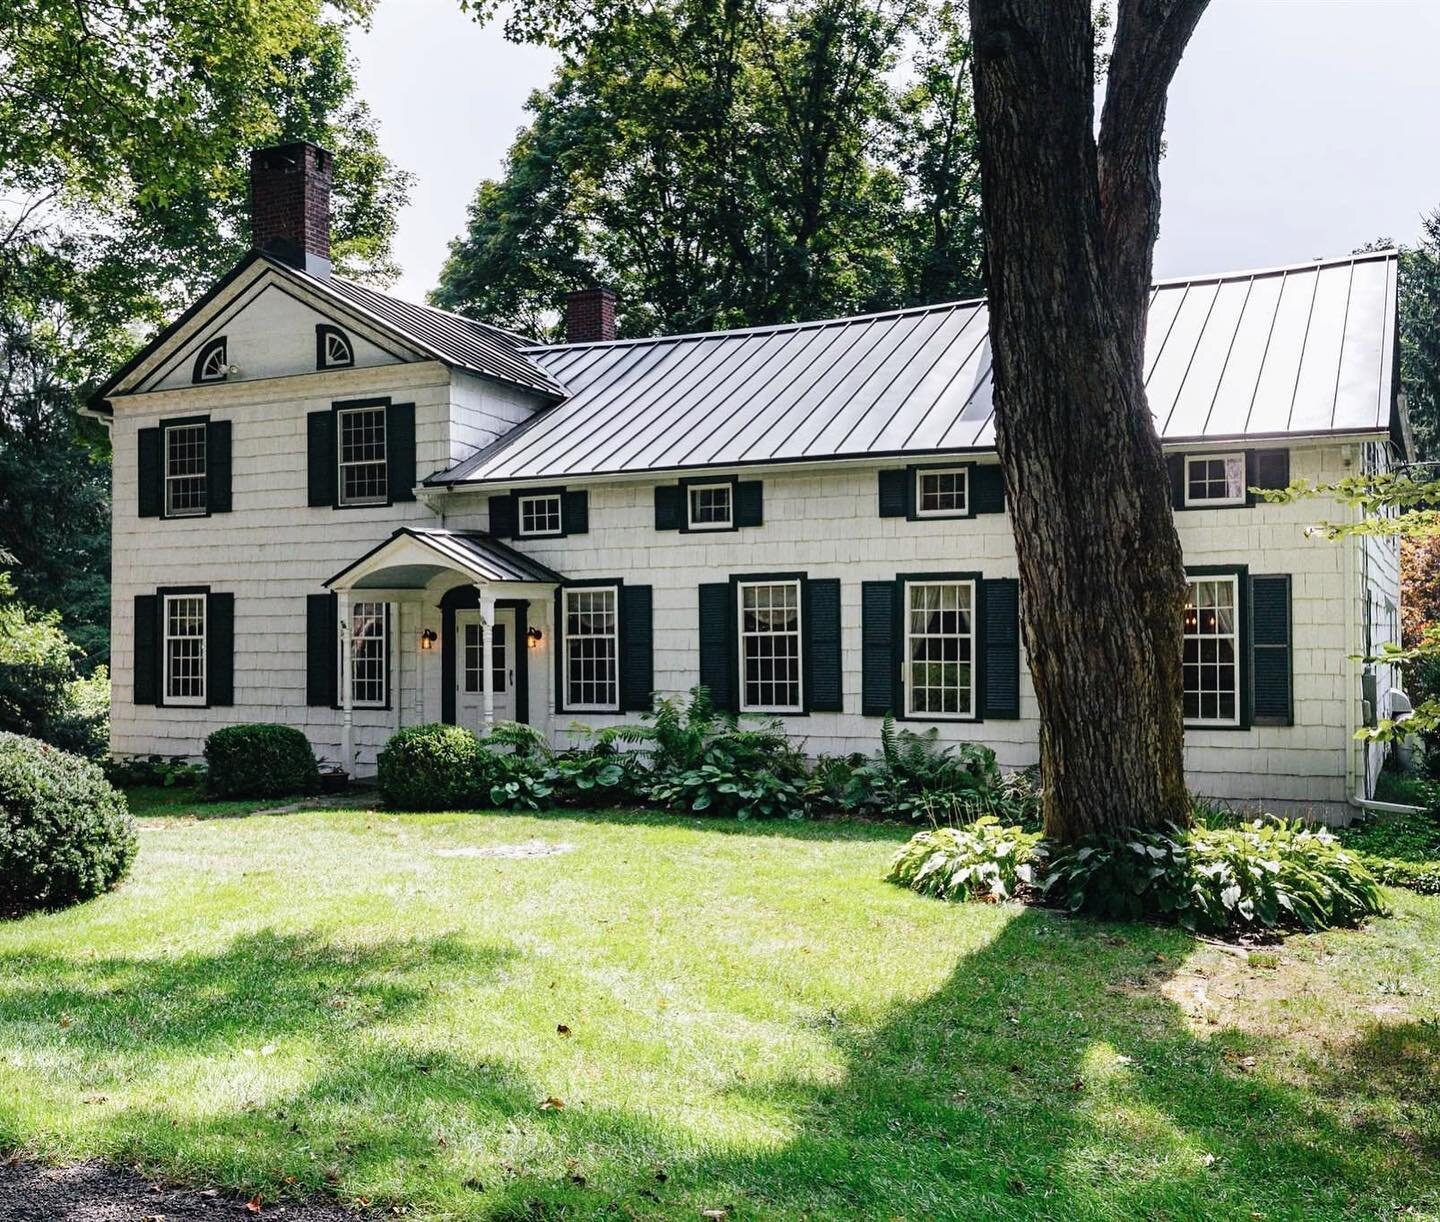 Our #PropertyOfTheWeek is the Fallkill Farm: a historic gem on over 37 acres in the heart of Dutchess County 🏡⁠⁠
.⁠⁠
It's been too long since we've gotten to do one of these - and what a great one to jump right in with! ⁠⁠
This 18th-century farmhous